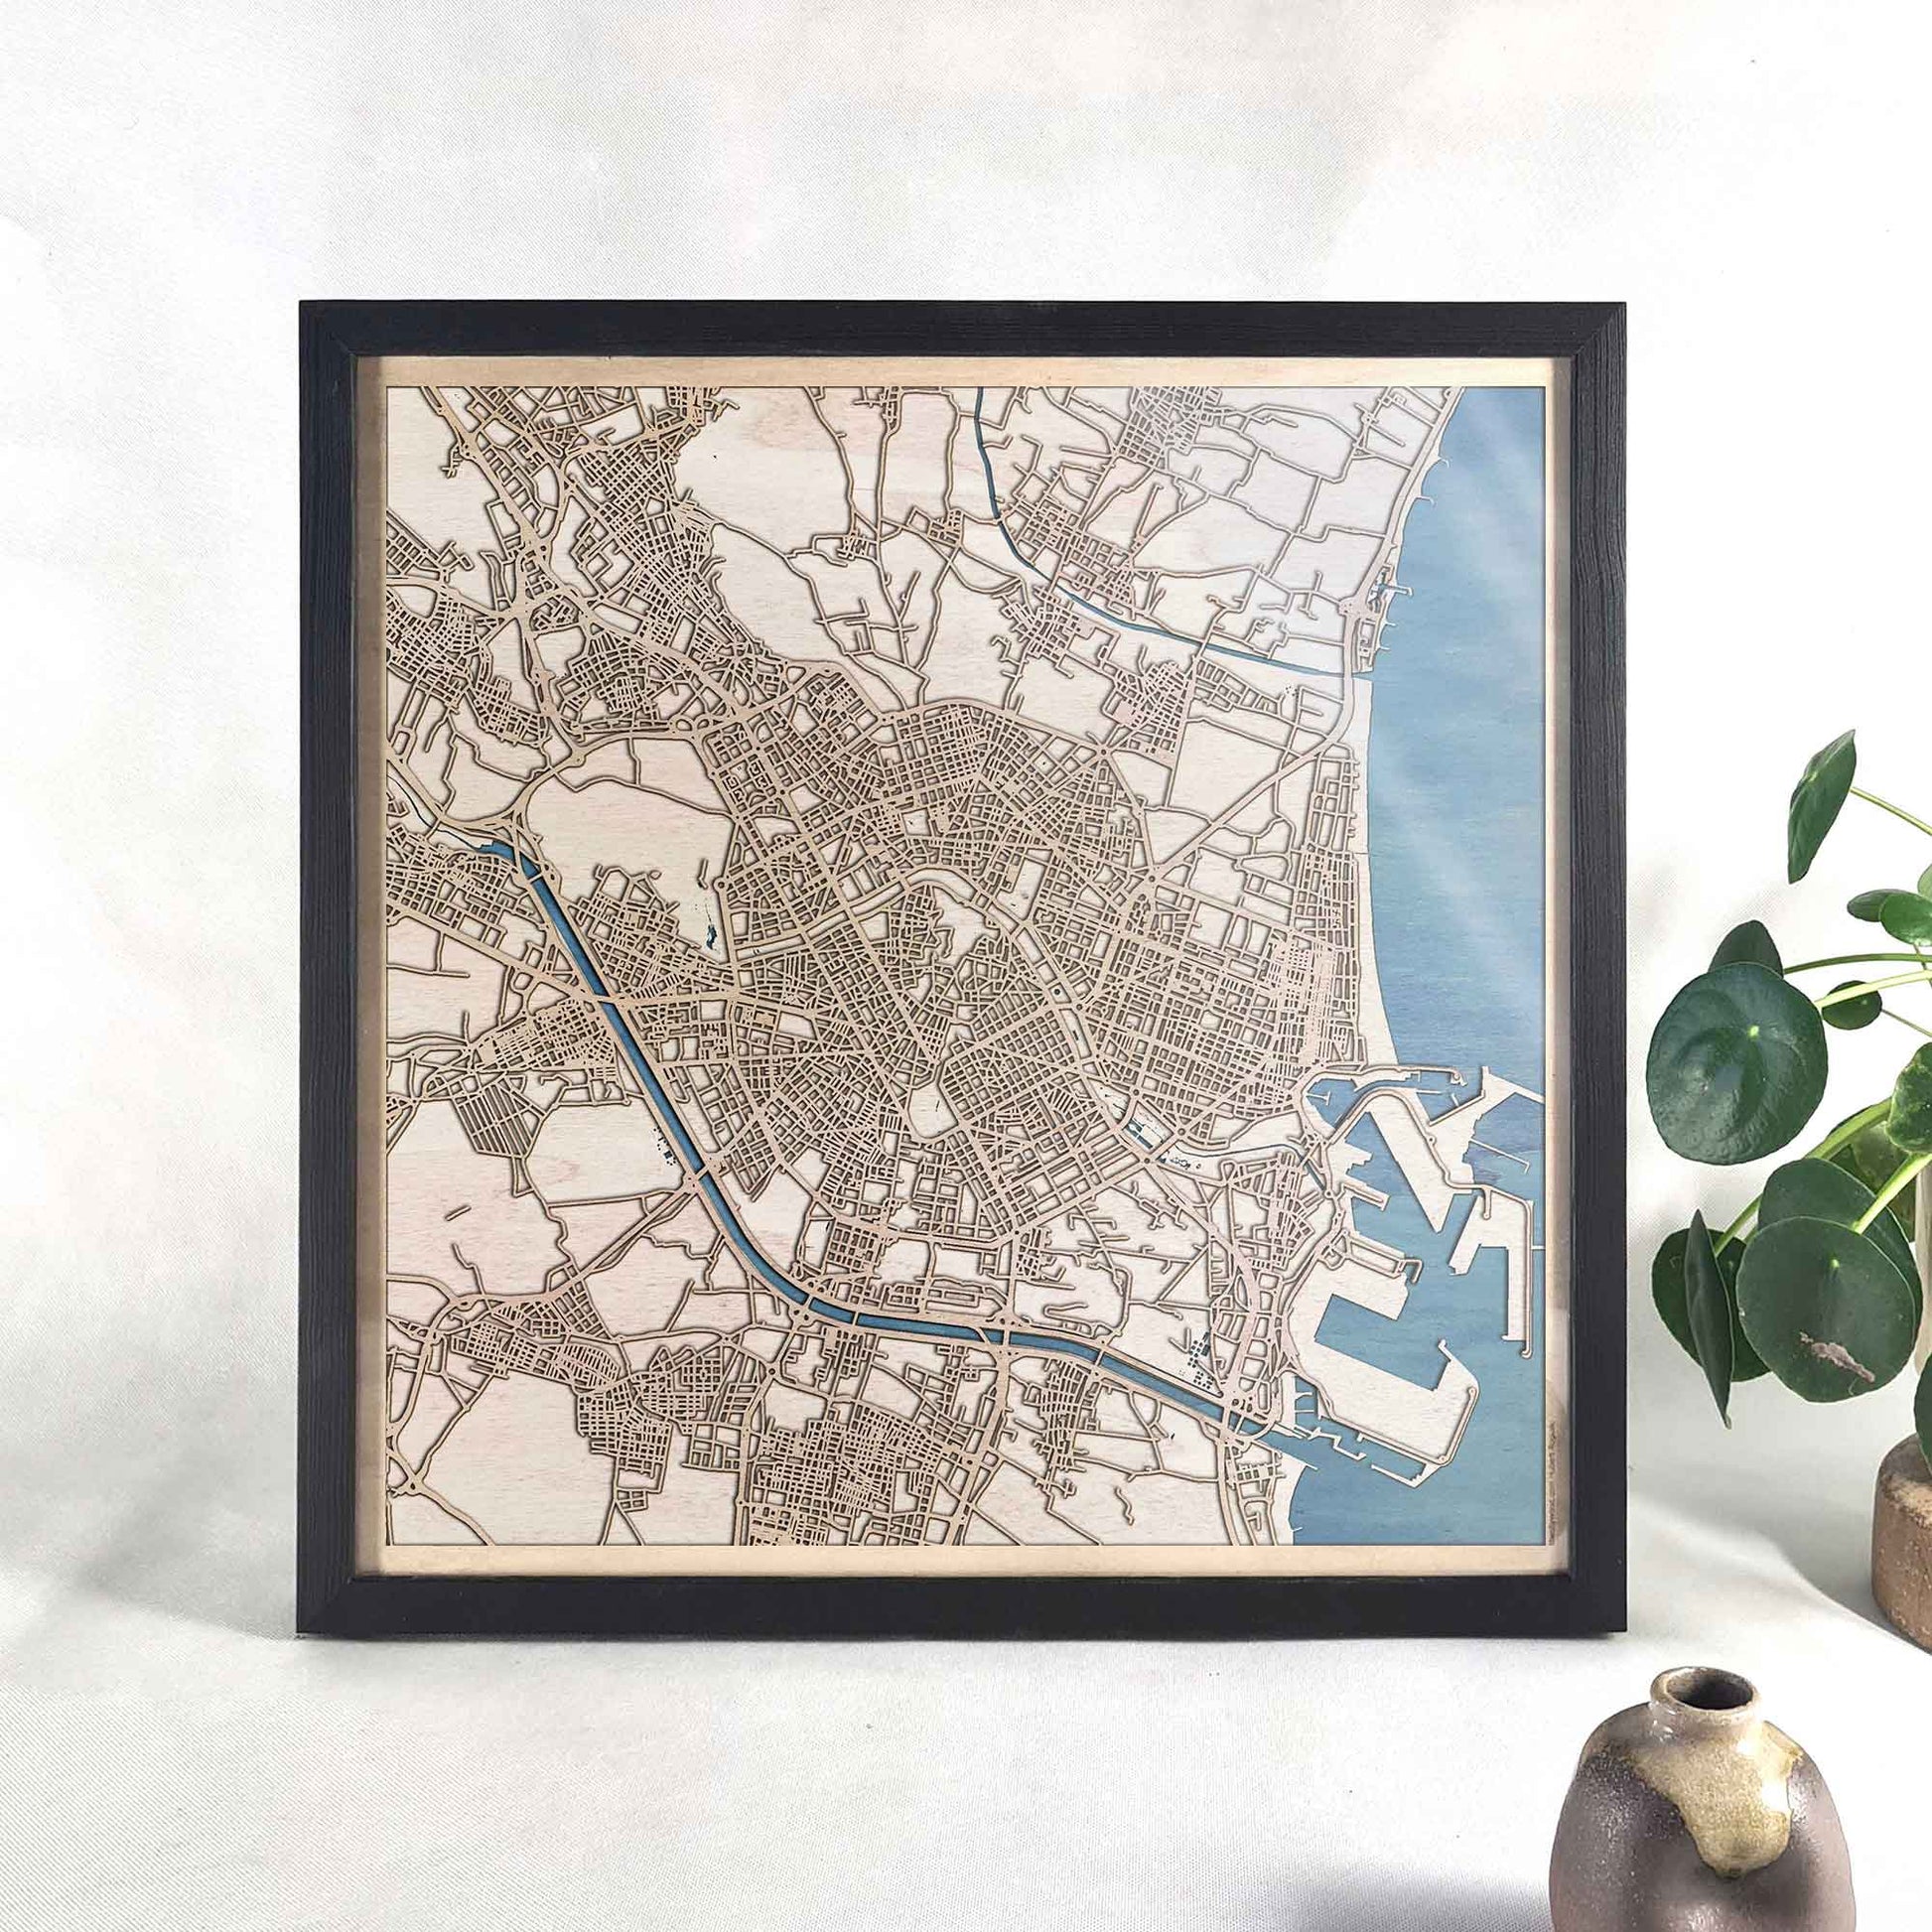 Valencia Wooden Map by CityWood - Custom Wood Map Art - Unique Laser Cut Engraved - Anniversary Gift